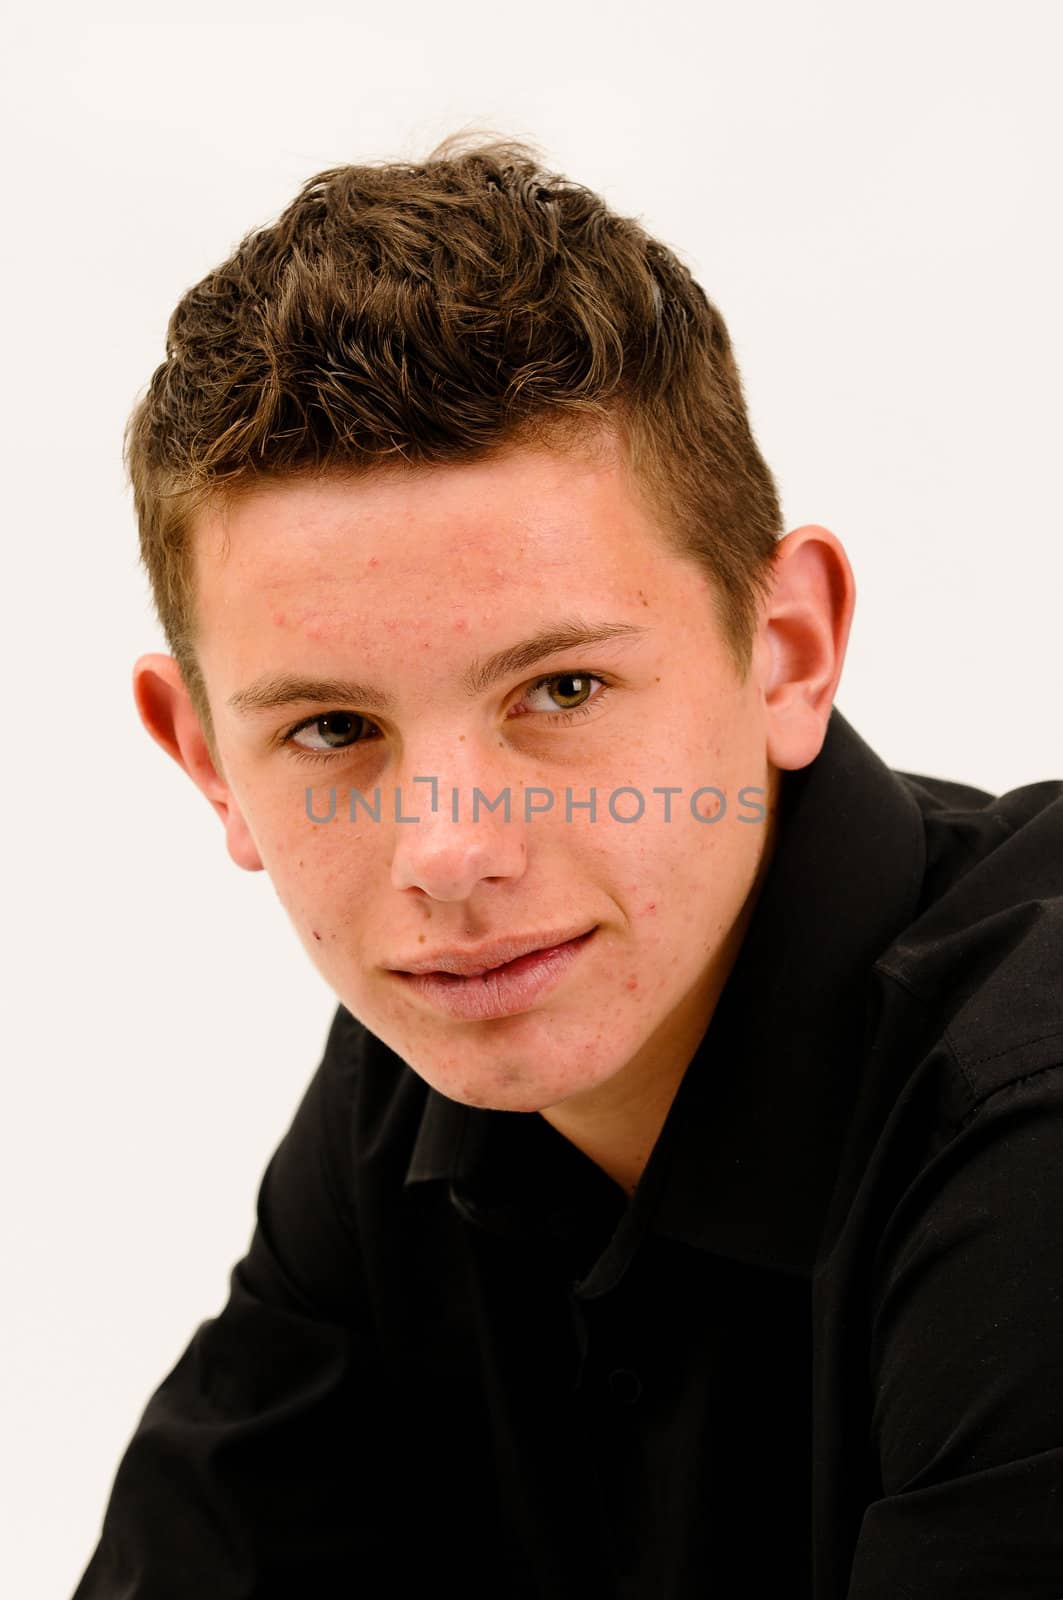 short haired teenager with bad skin and acne smiling by Ansunette